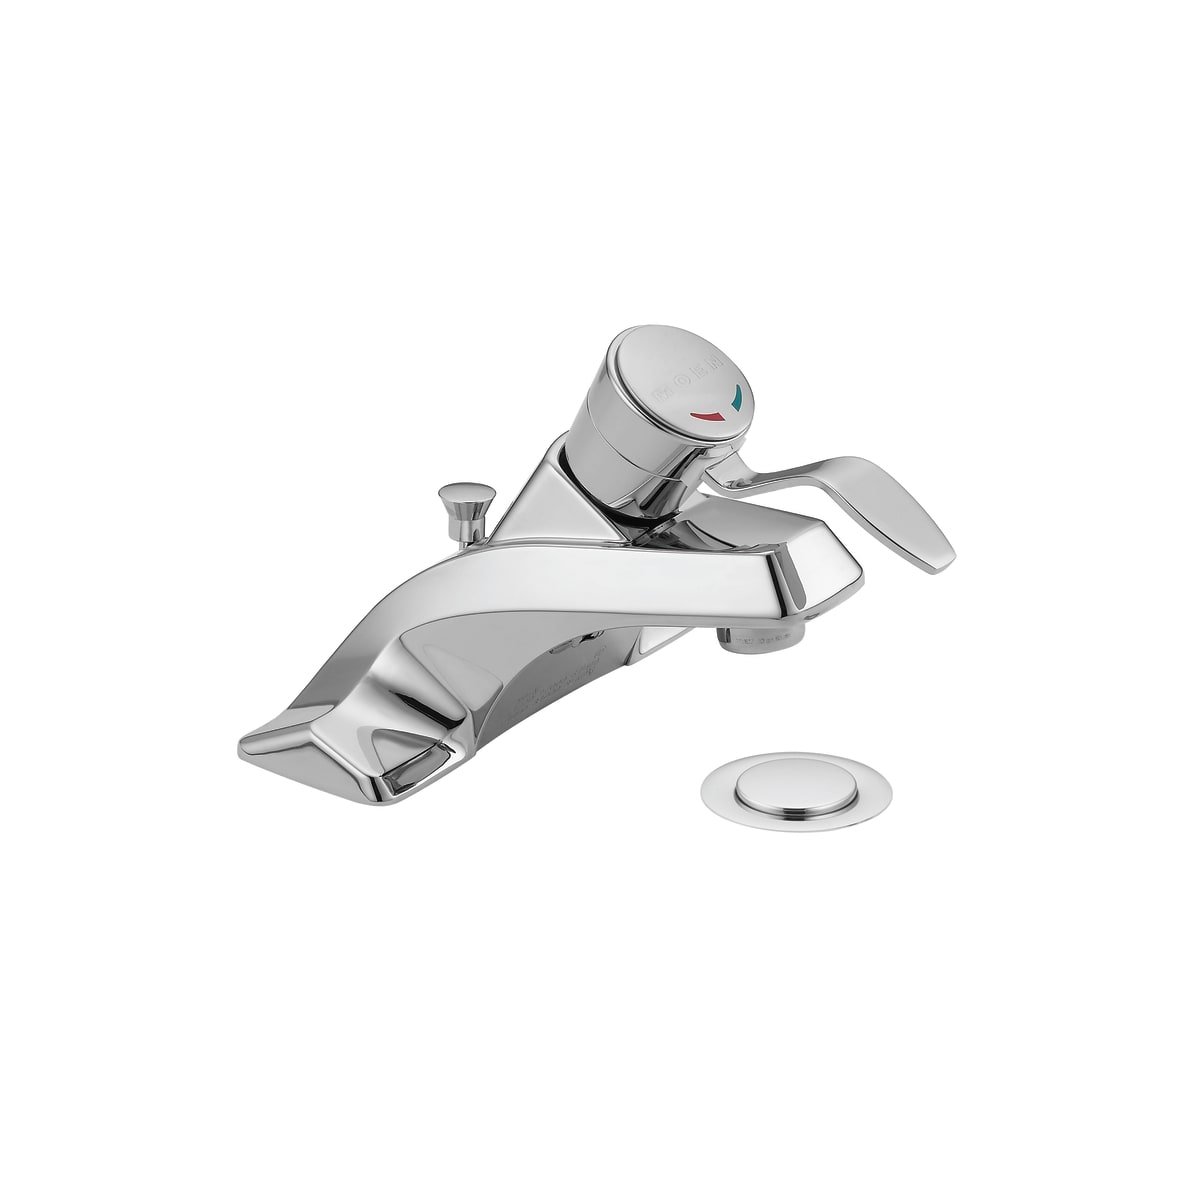 Moen 8475 Chrome Single Handle Bathroom Faucet From The M Bition